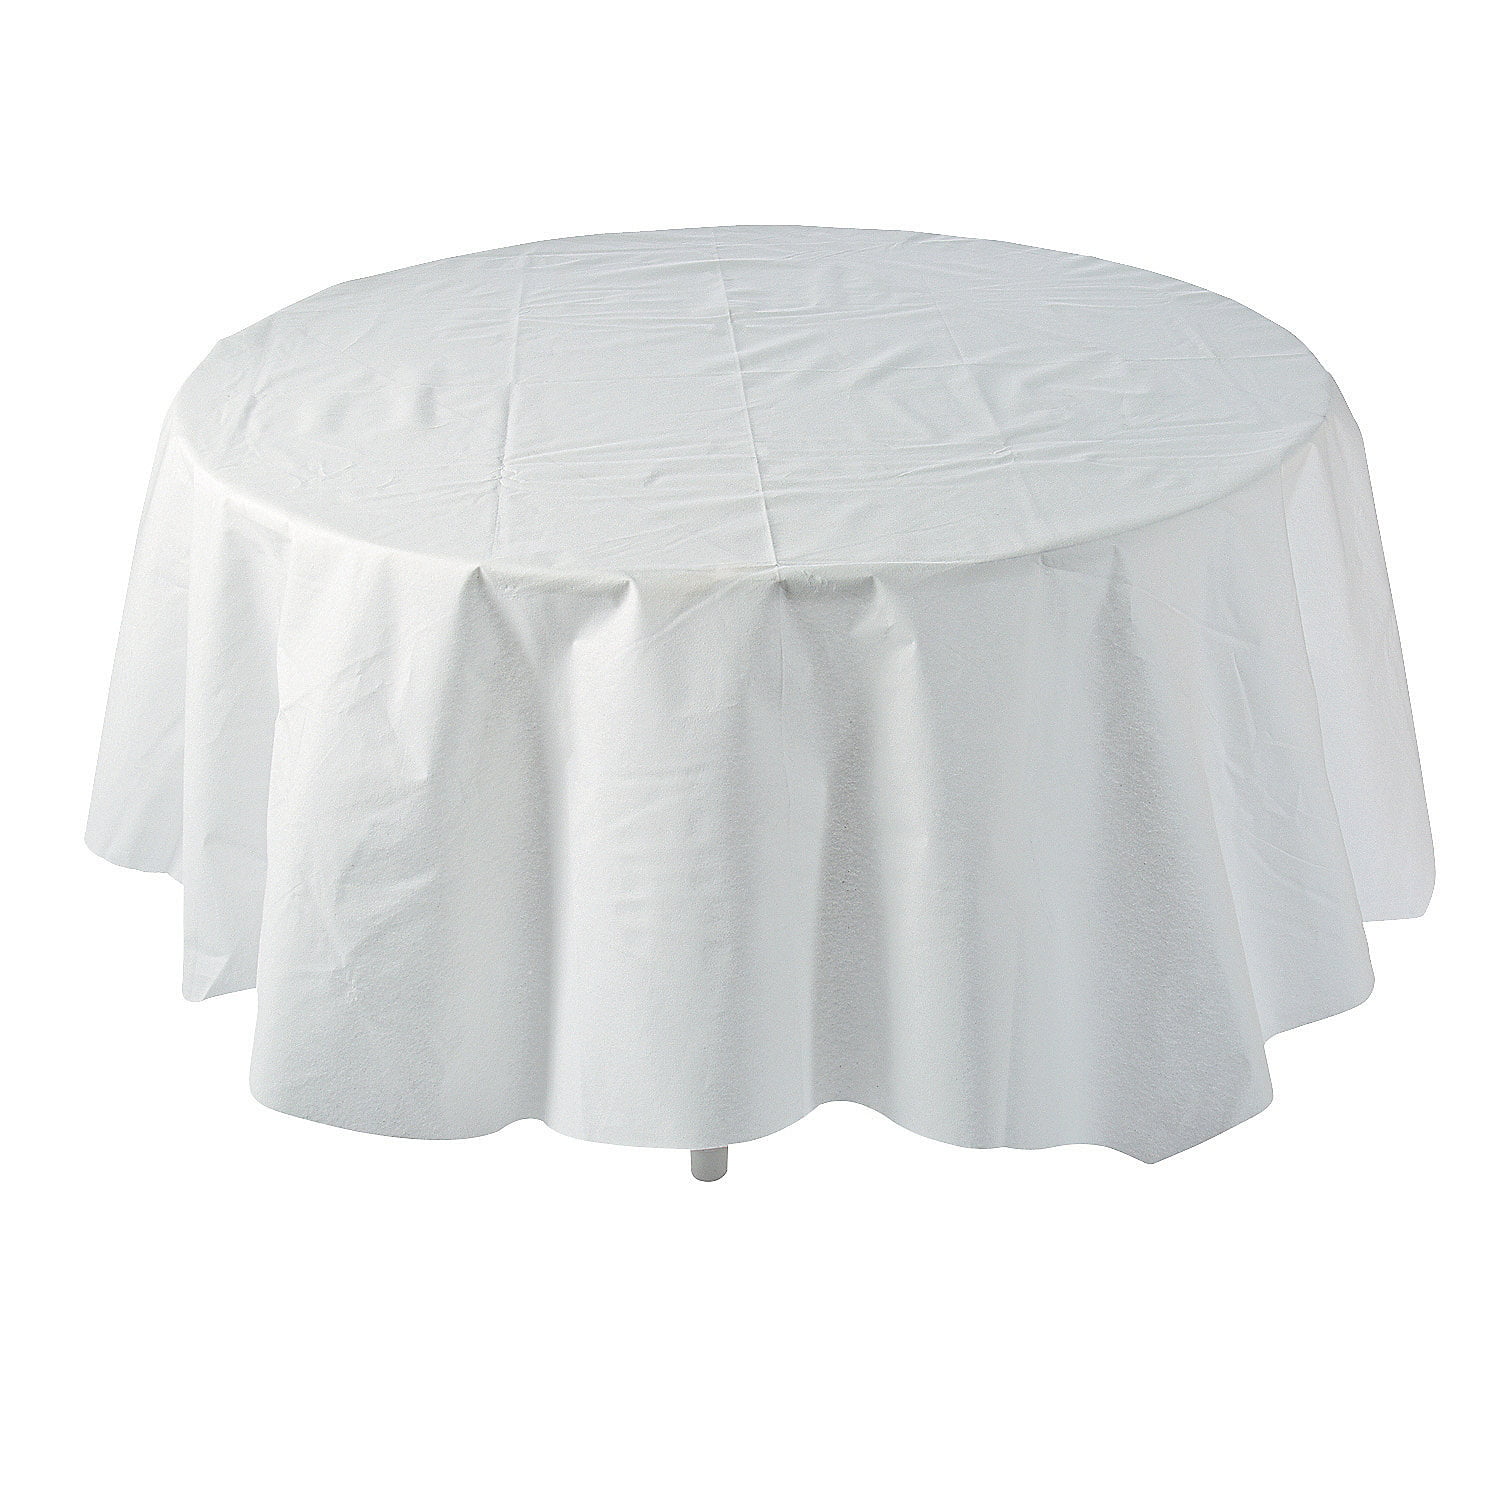 White tablecloth roll